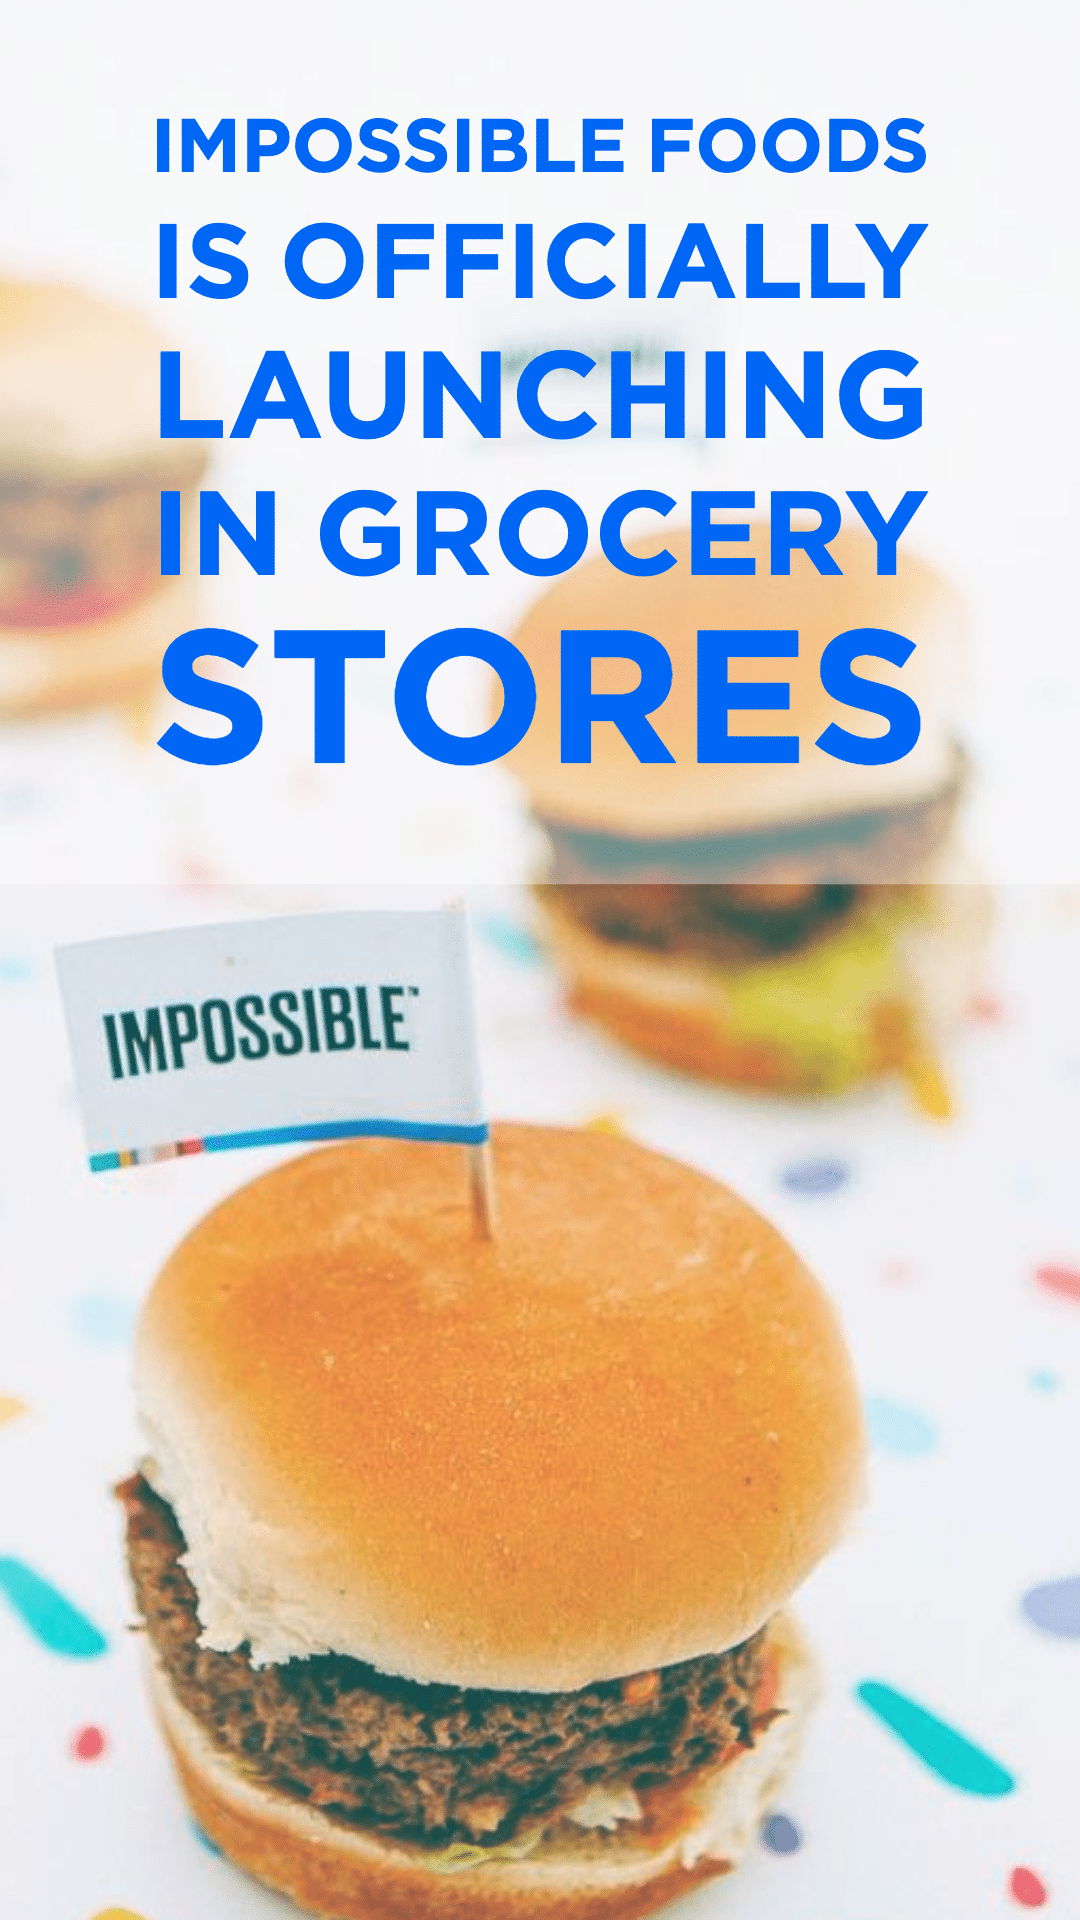 Plant-Based Company Impossible Foods Is Officially Launching in Grocery Stores